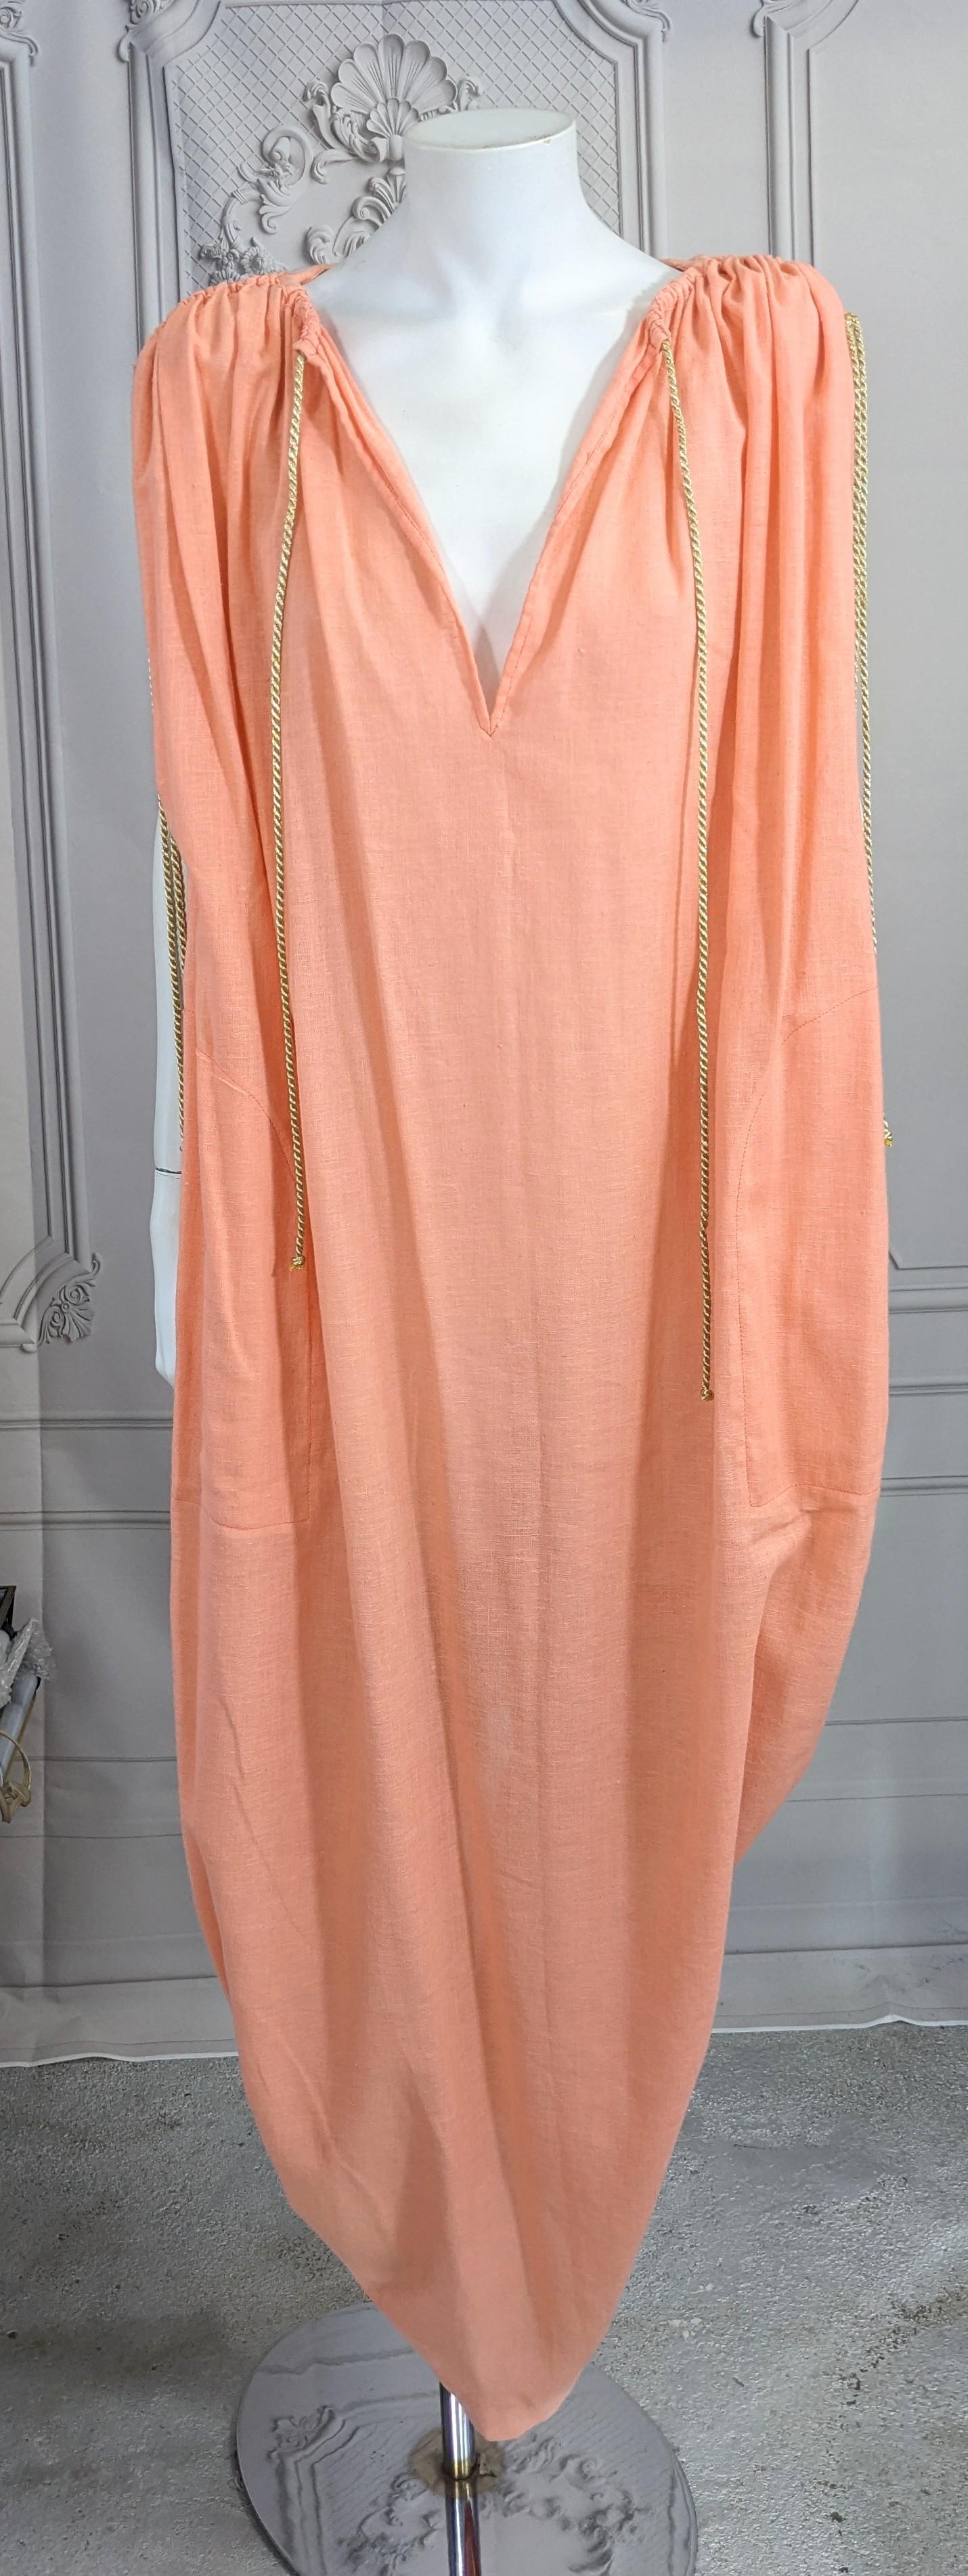 Yves Saint Laurent Rive Gauche Early Peach Gauze Toga In Excellent Condition For Sale In New York, NY